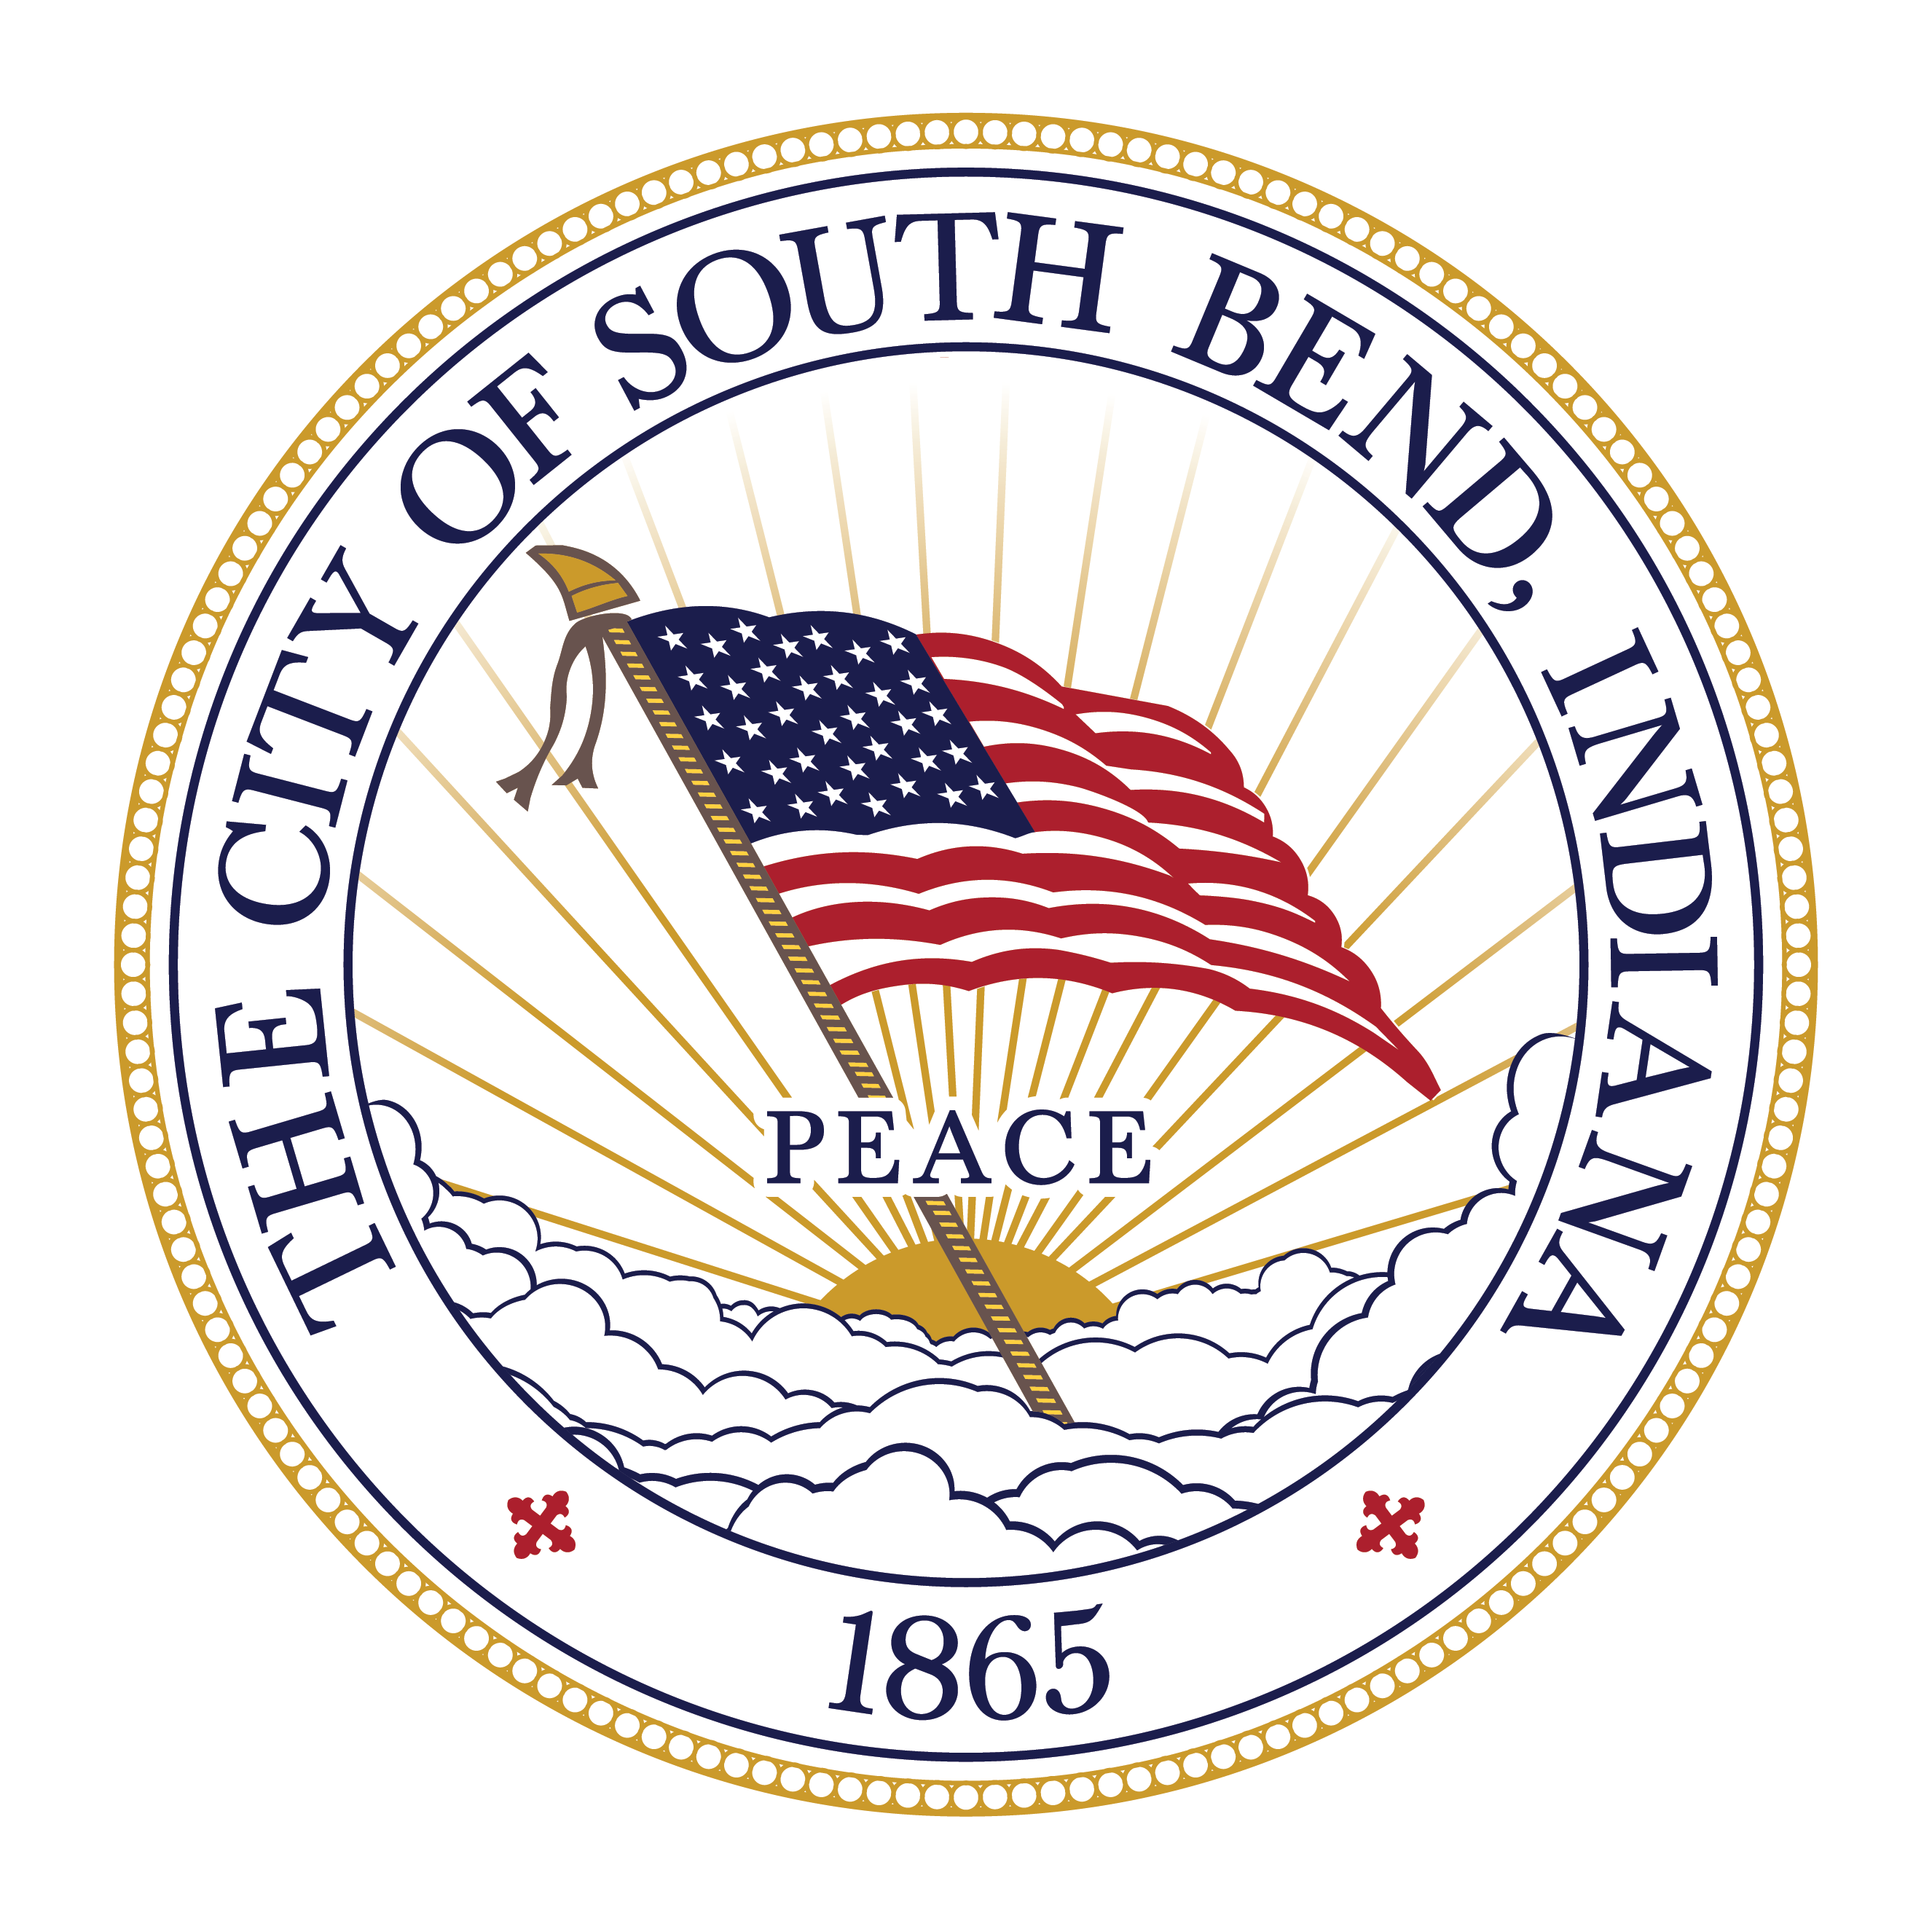 City of South Bend Seal